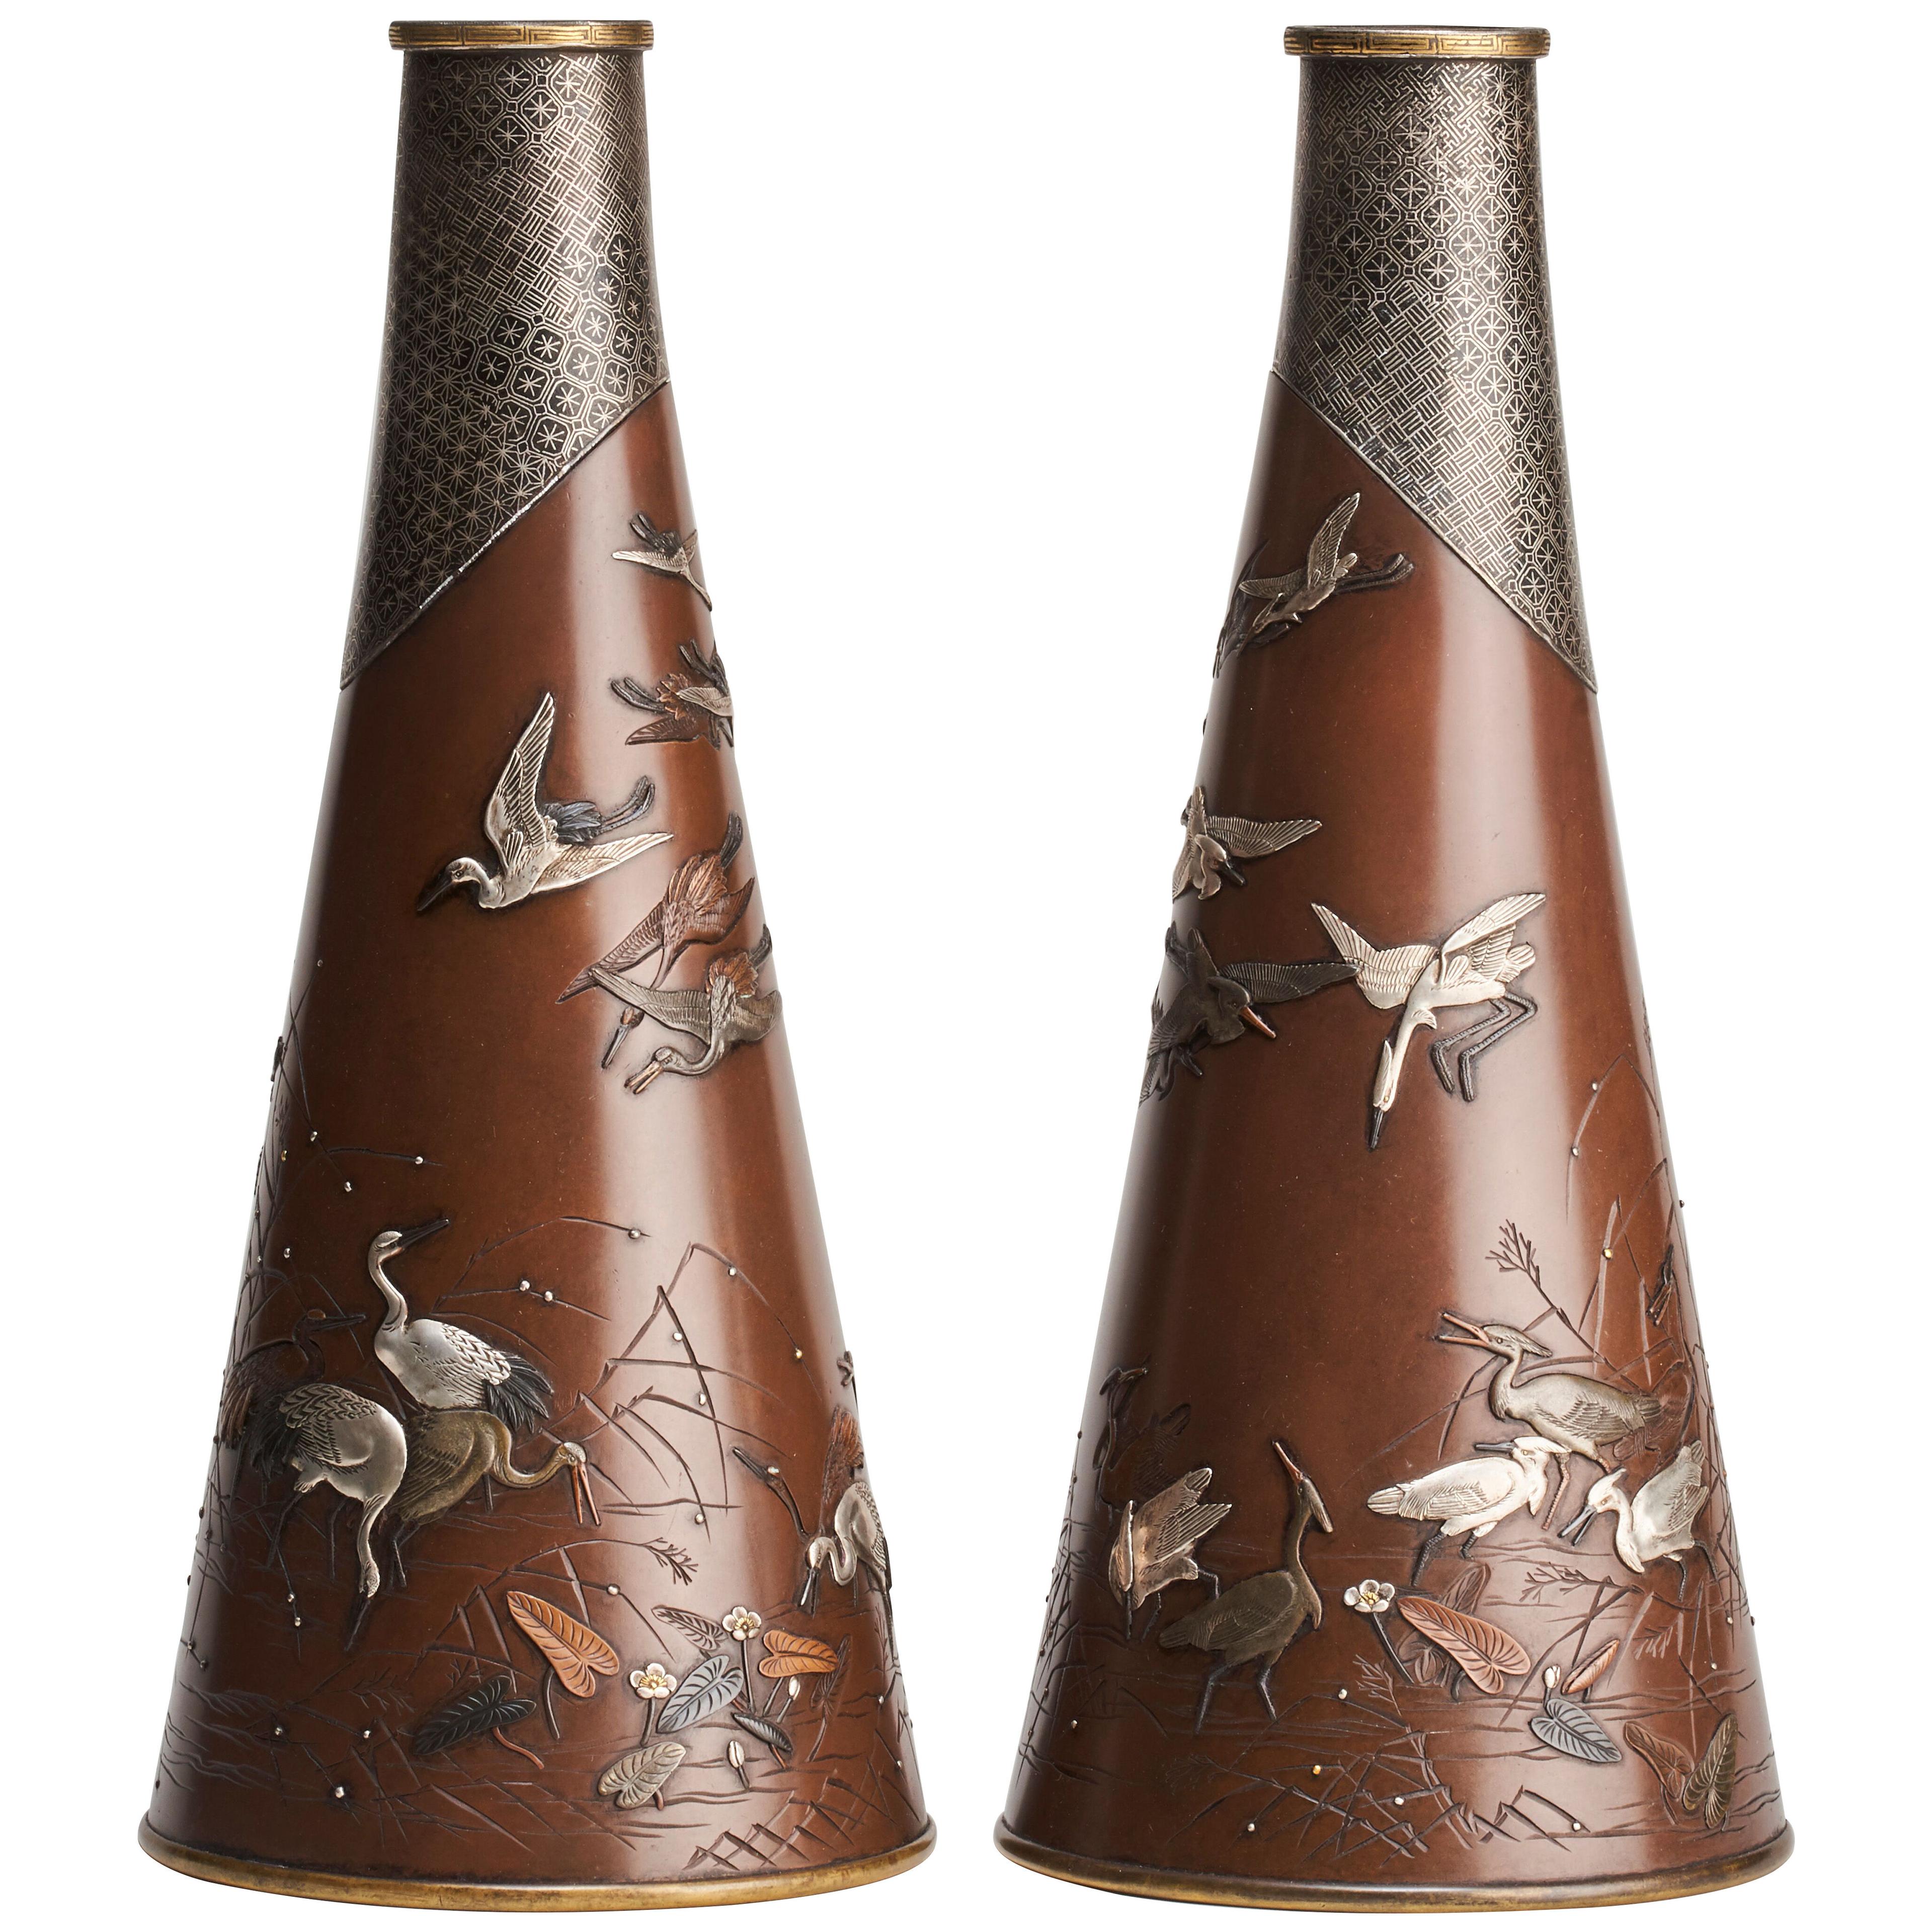 A fine and unusual pair of Japanese Bronze and multi-metal conical vases